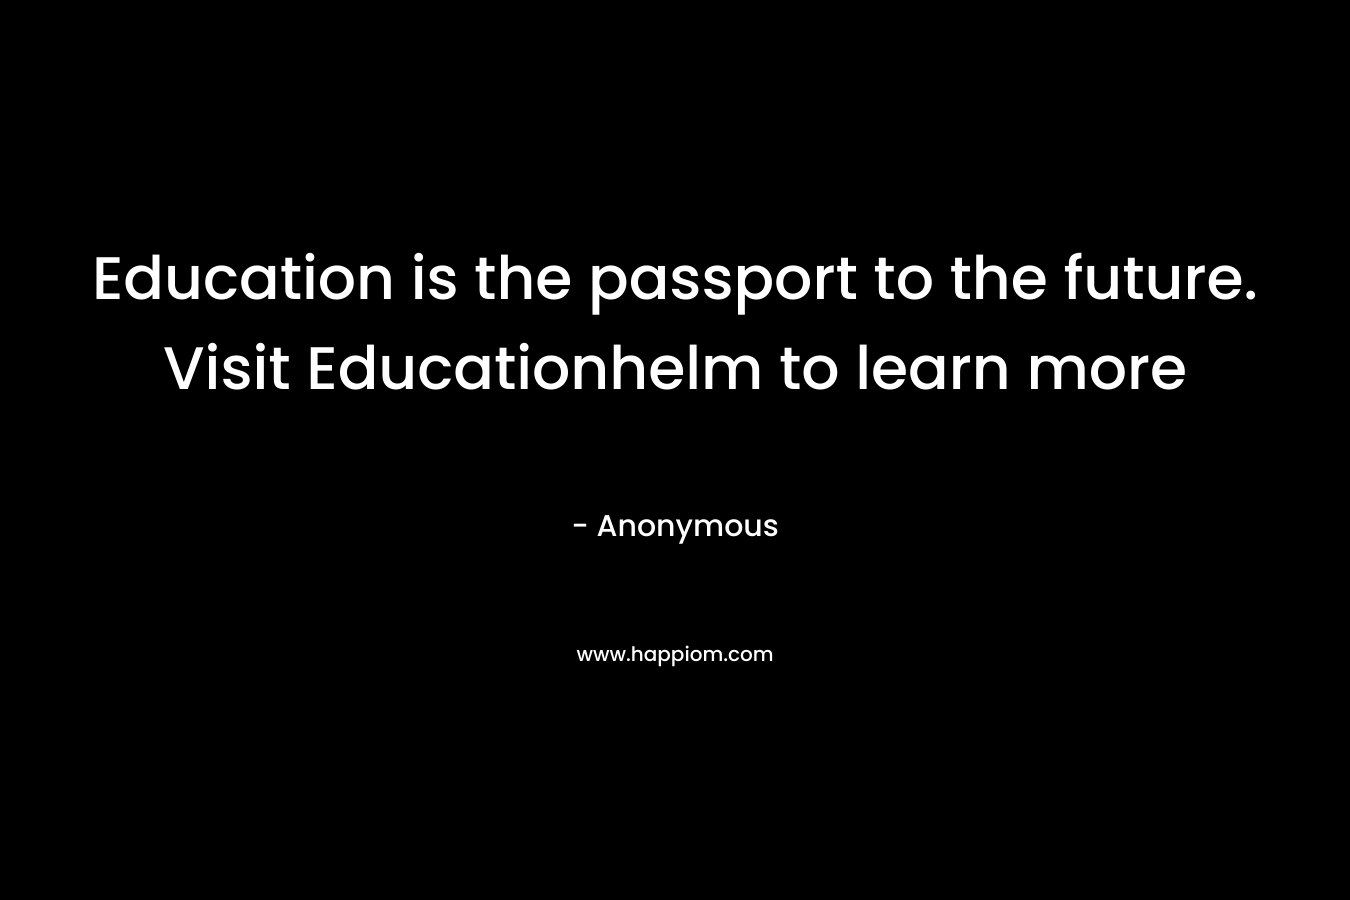 Education is the passport to the future. Visit Educationhelm to learn more